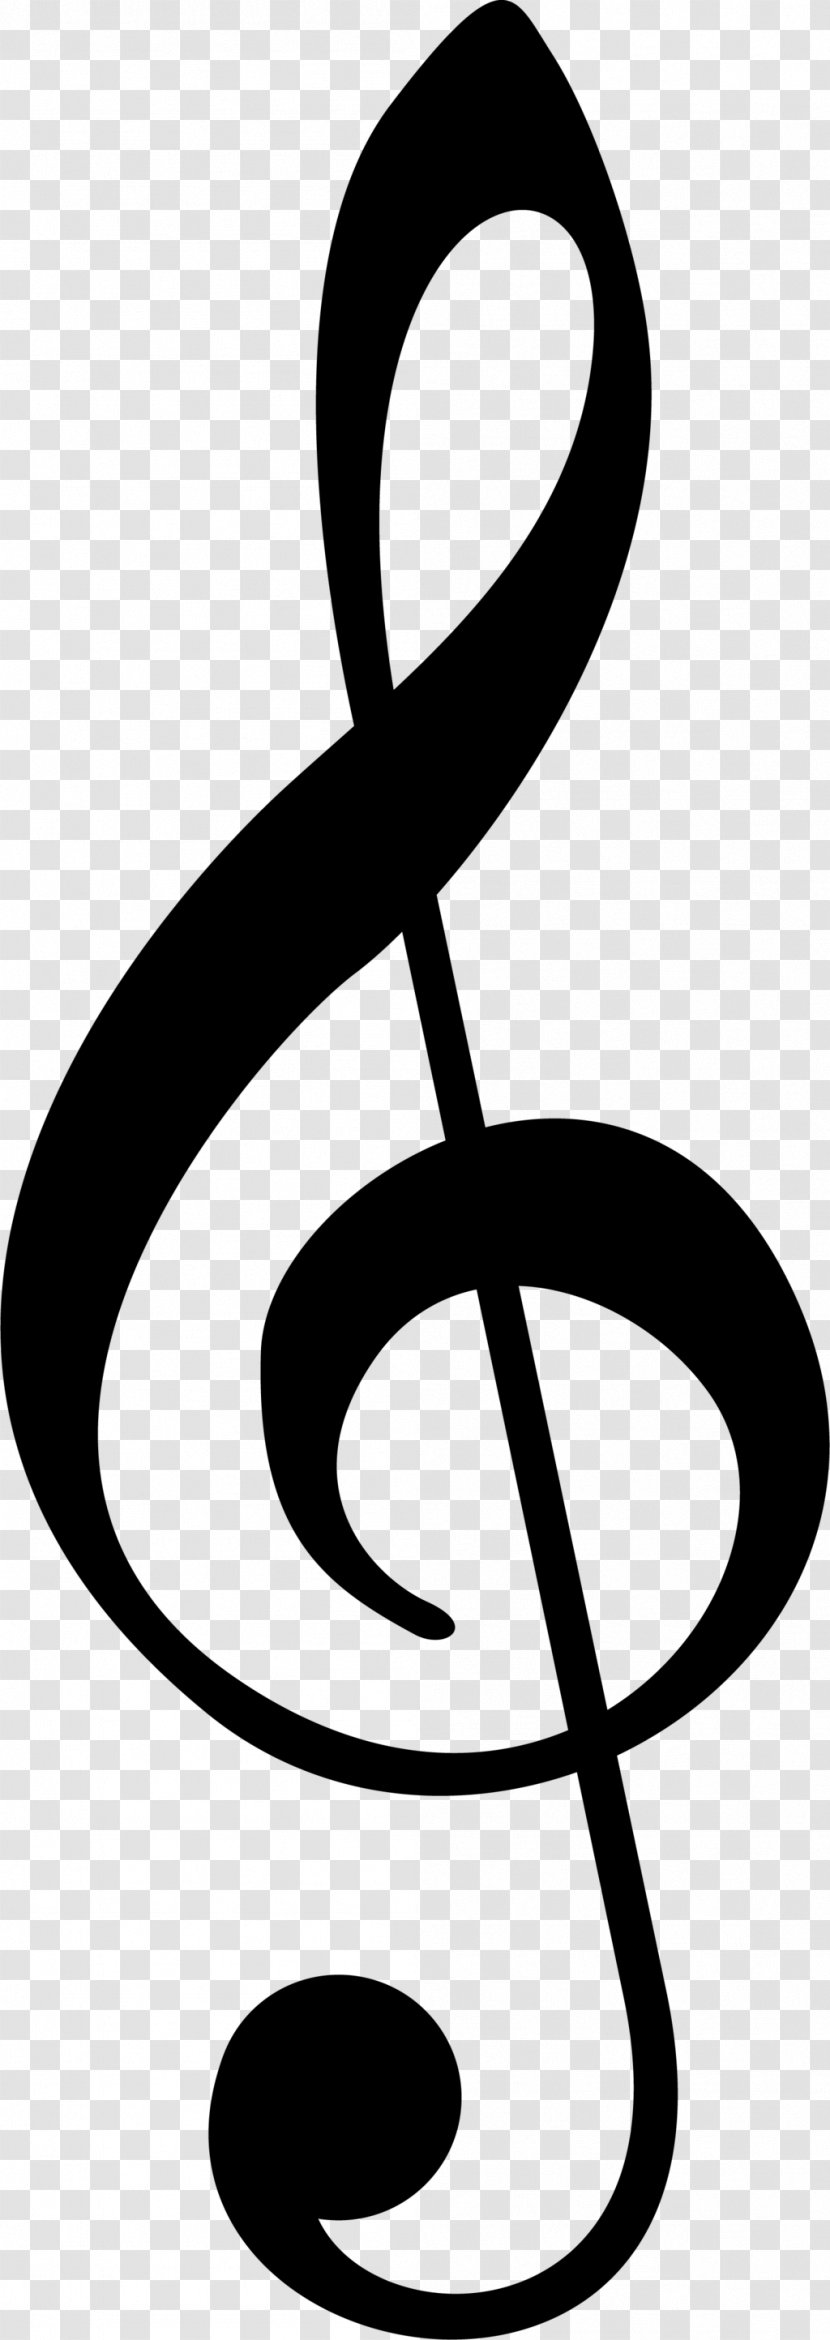 Clef Royalty-free Musical Note - Frame Transparent PNG